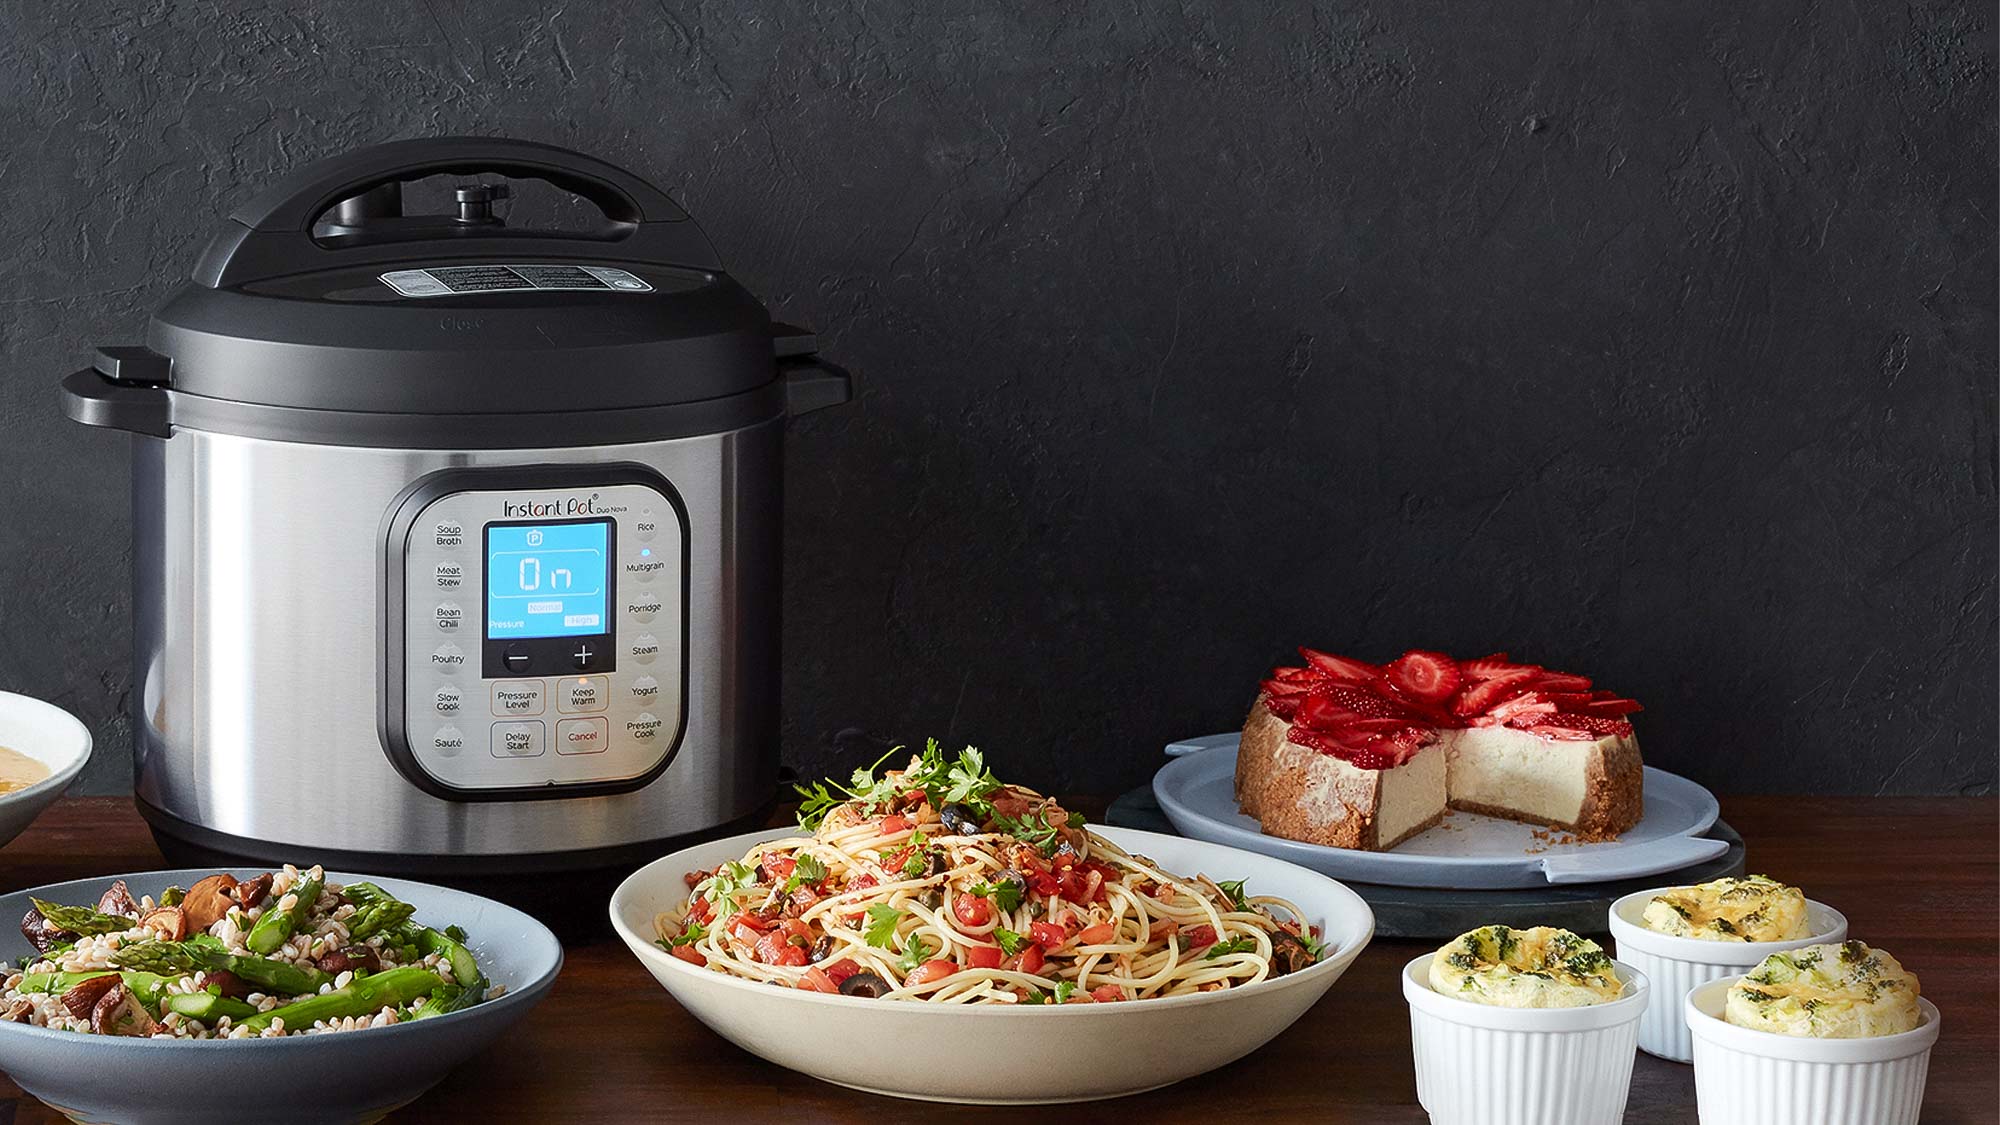 What is an Instant Pot?